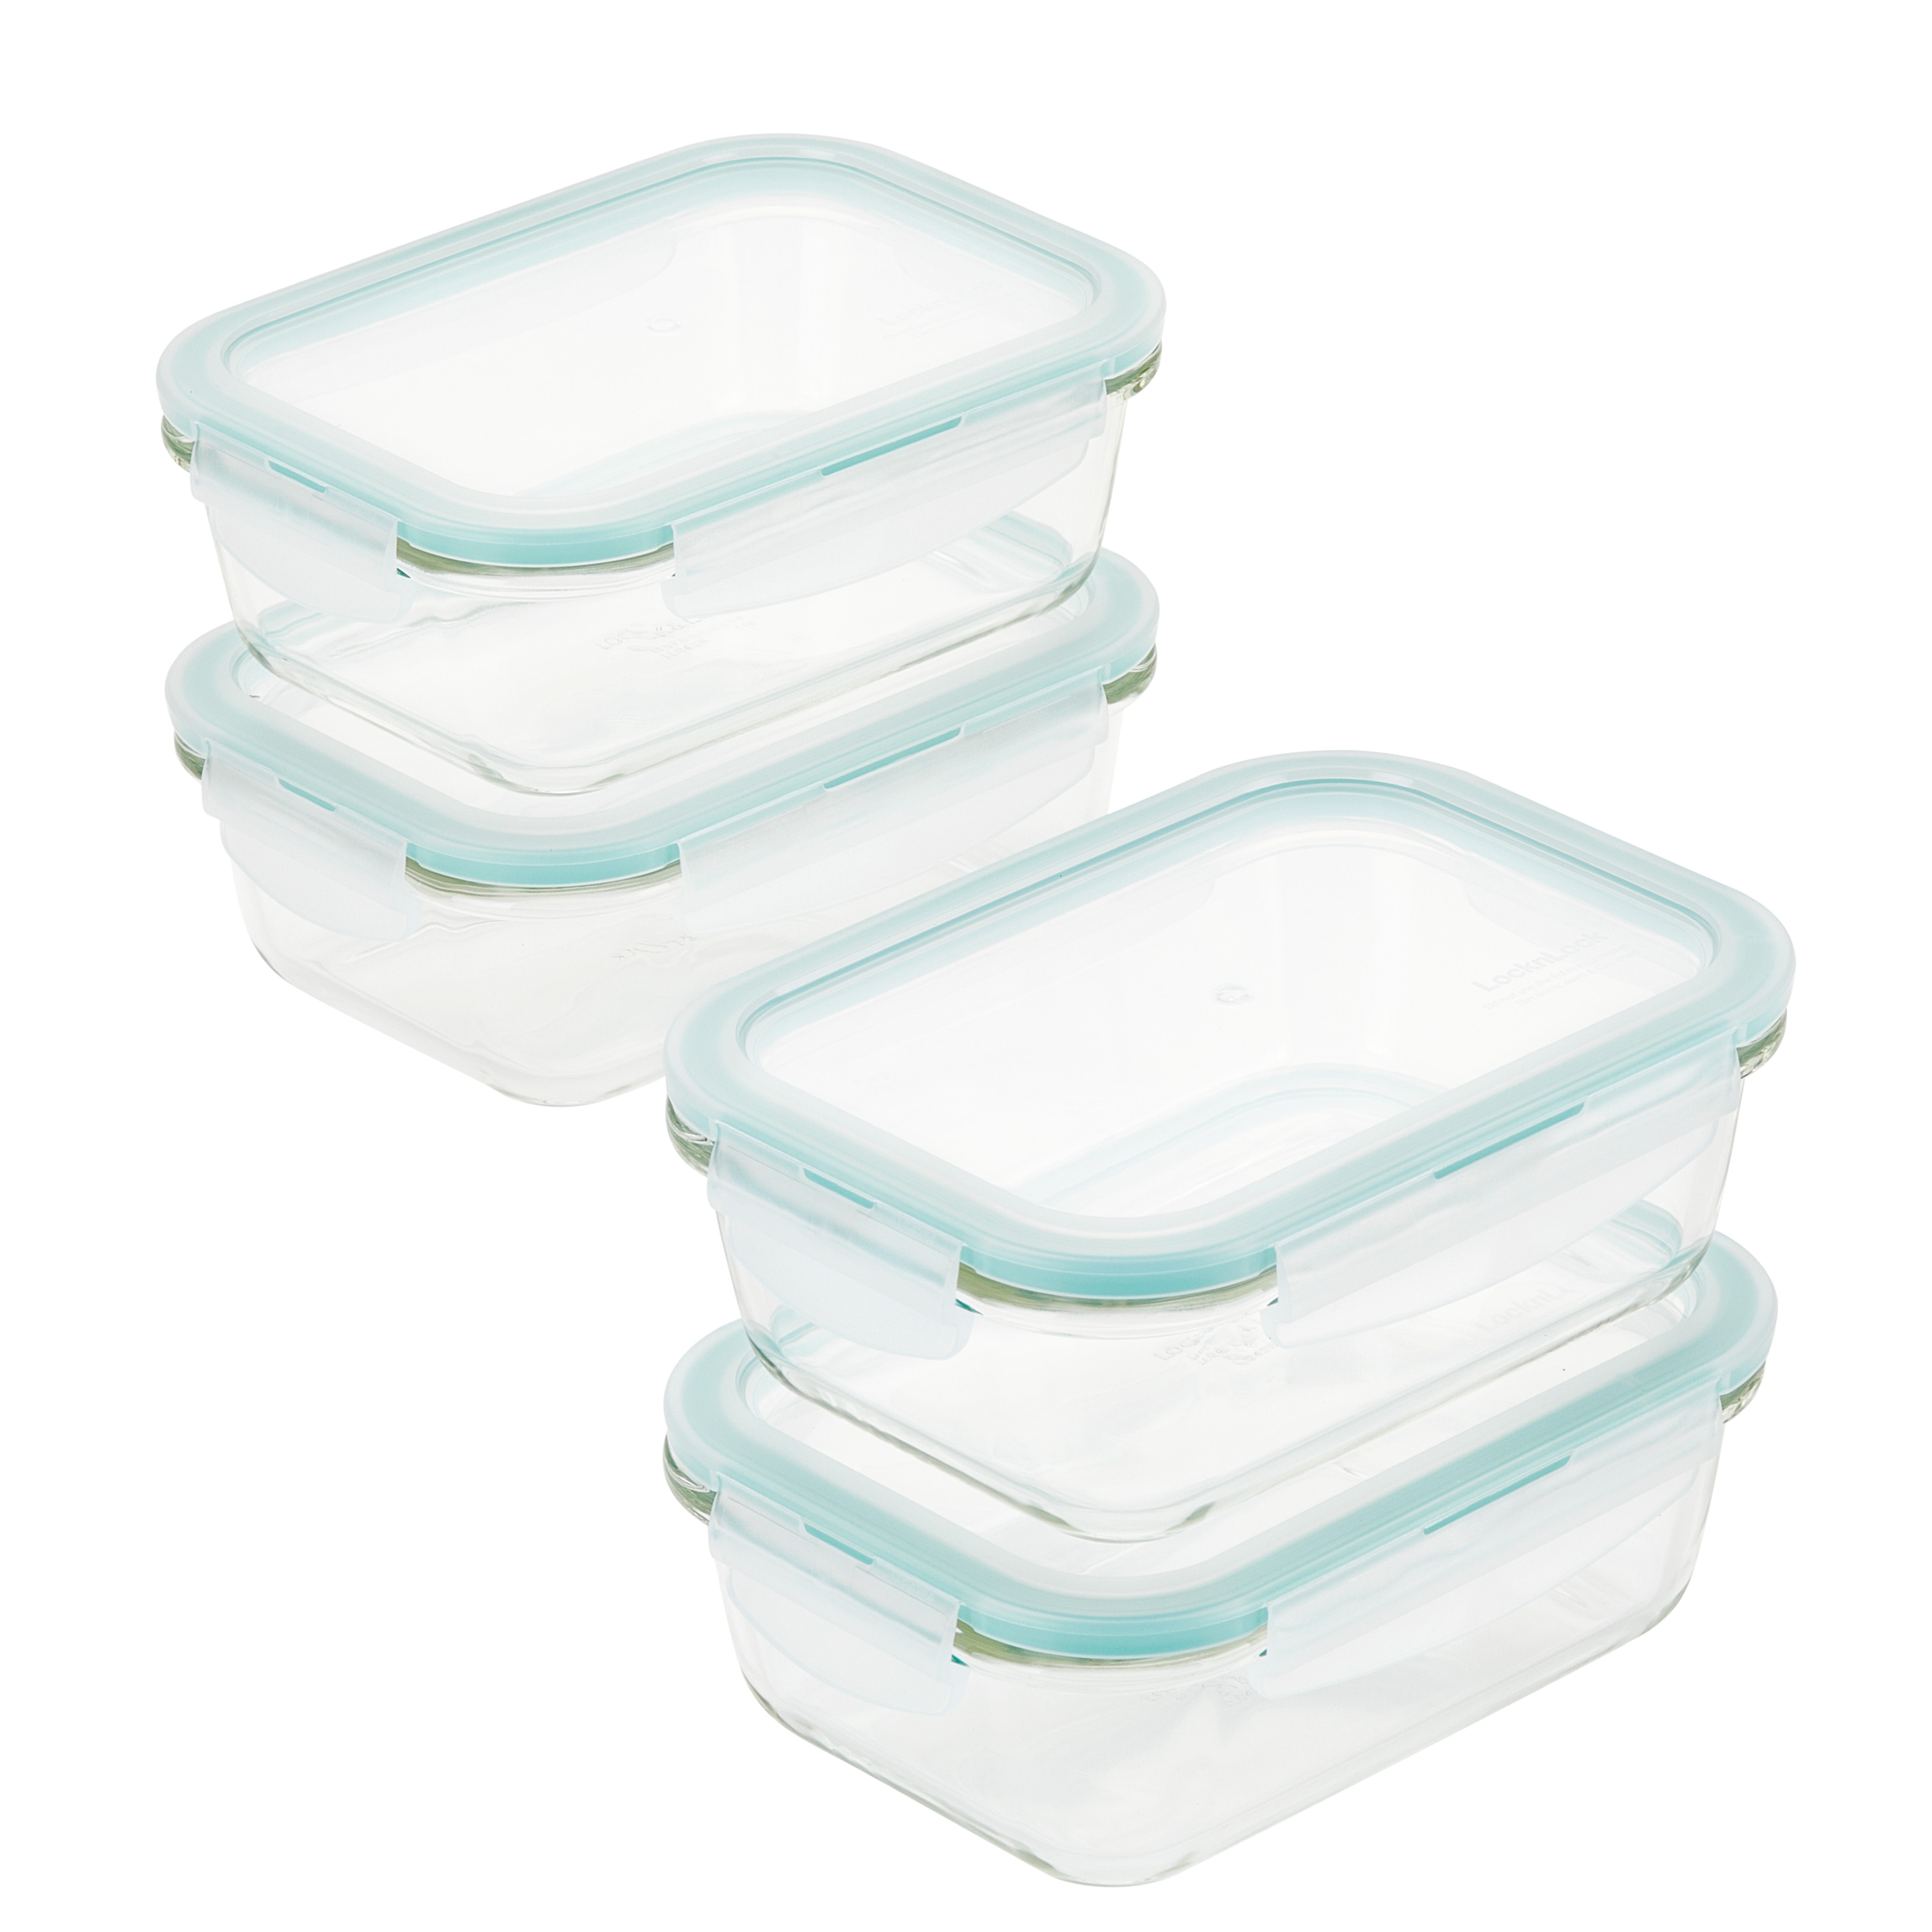 https://ak1.ostkcdn.com/images/products/is/images/direct/c2fae71b8b7d9af2501688e9c074d7e4325e8249/LocknLock-Purely-Better-Glass-Rectangular-Food-Storage-Containers%2C-21-Ounce%2C-Set-of-Four.jpg